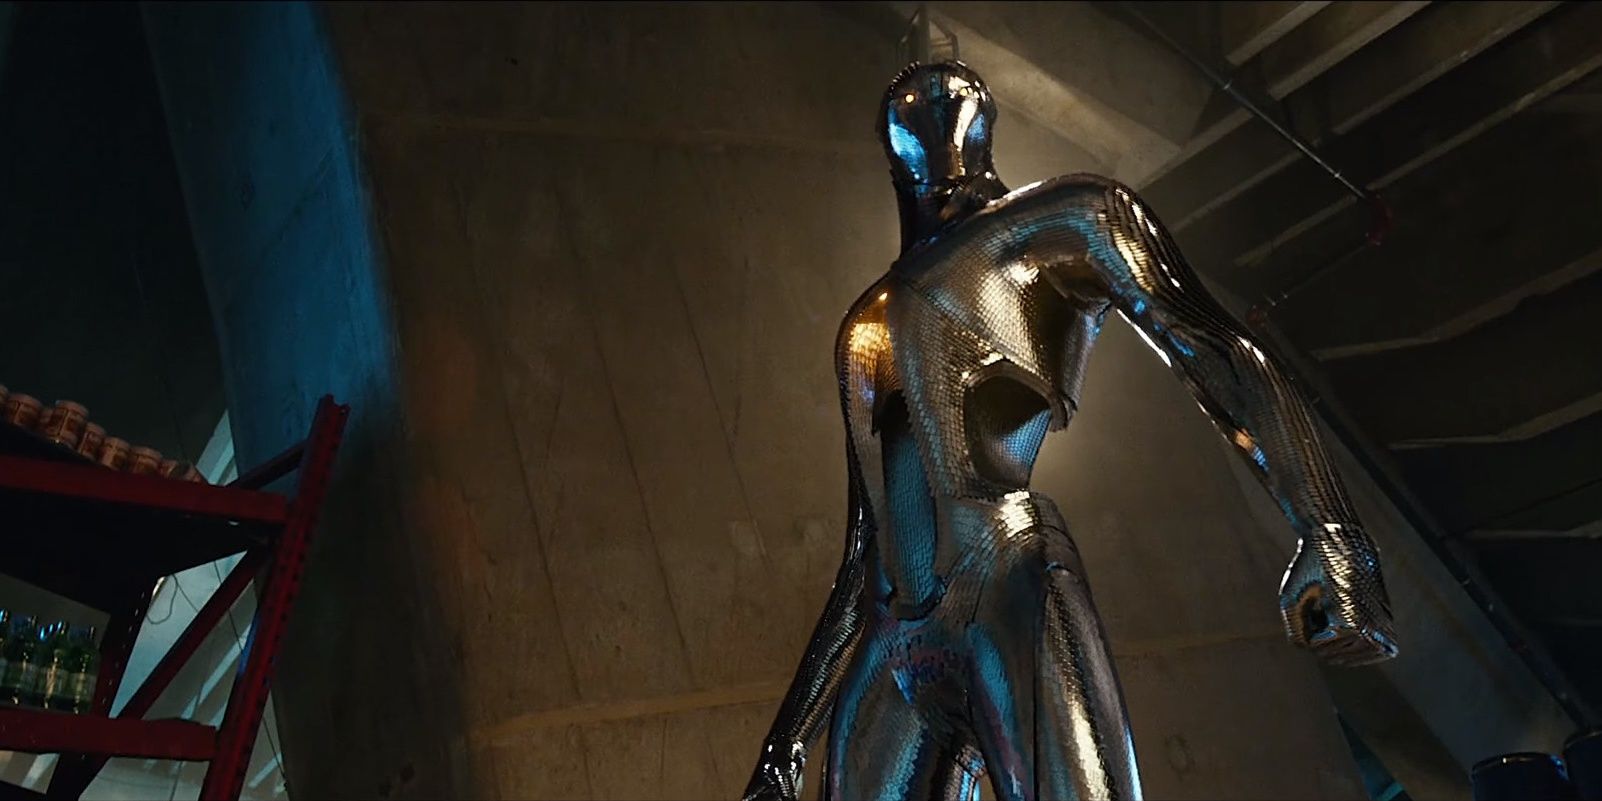 A sentinel looks imposing in X-Men: Days of Future Past